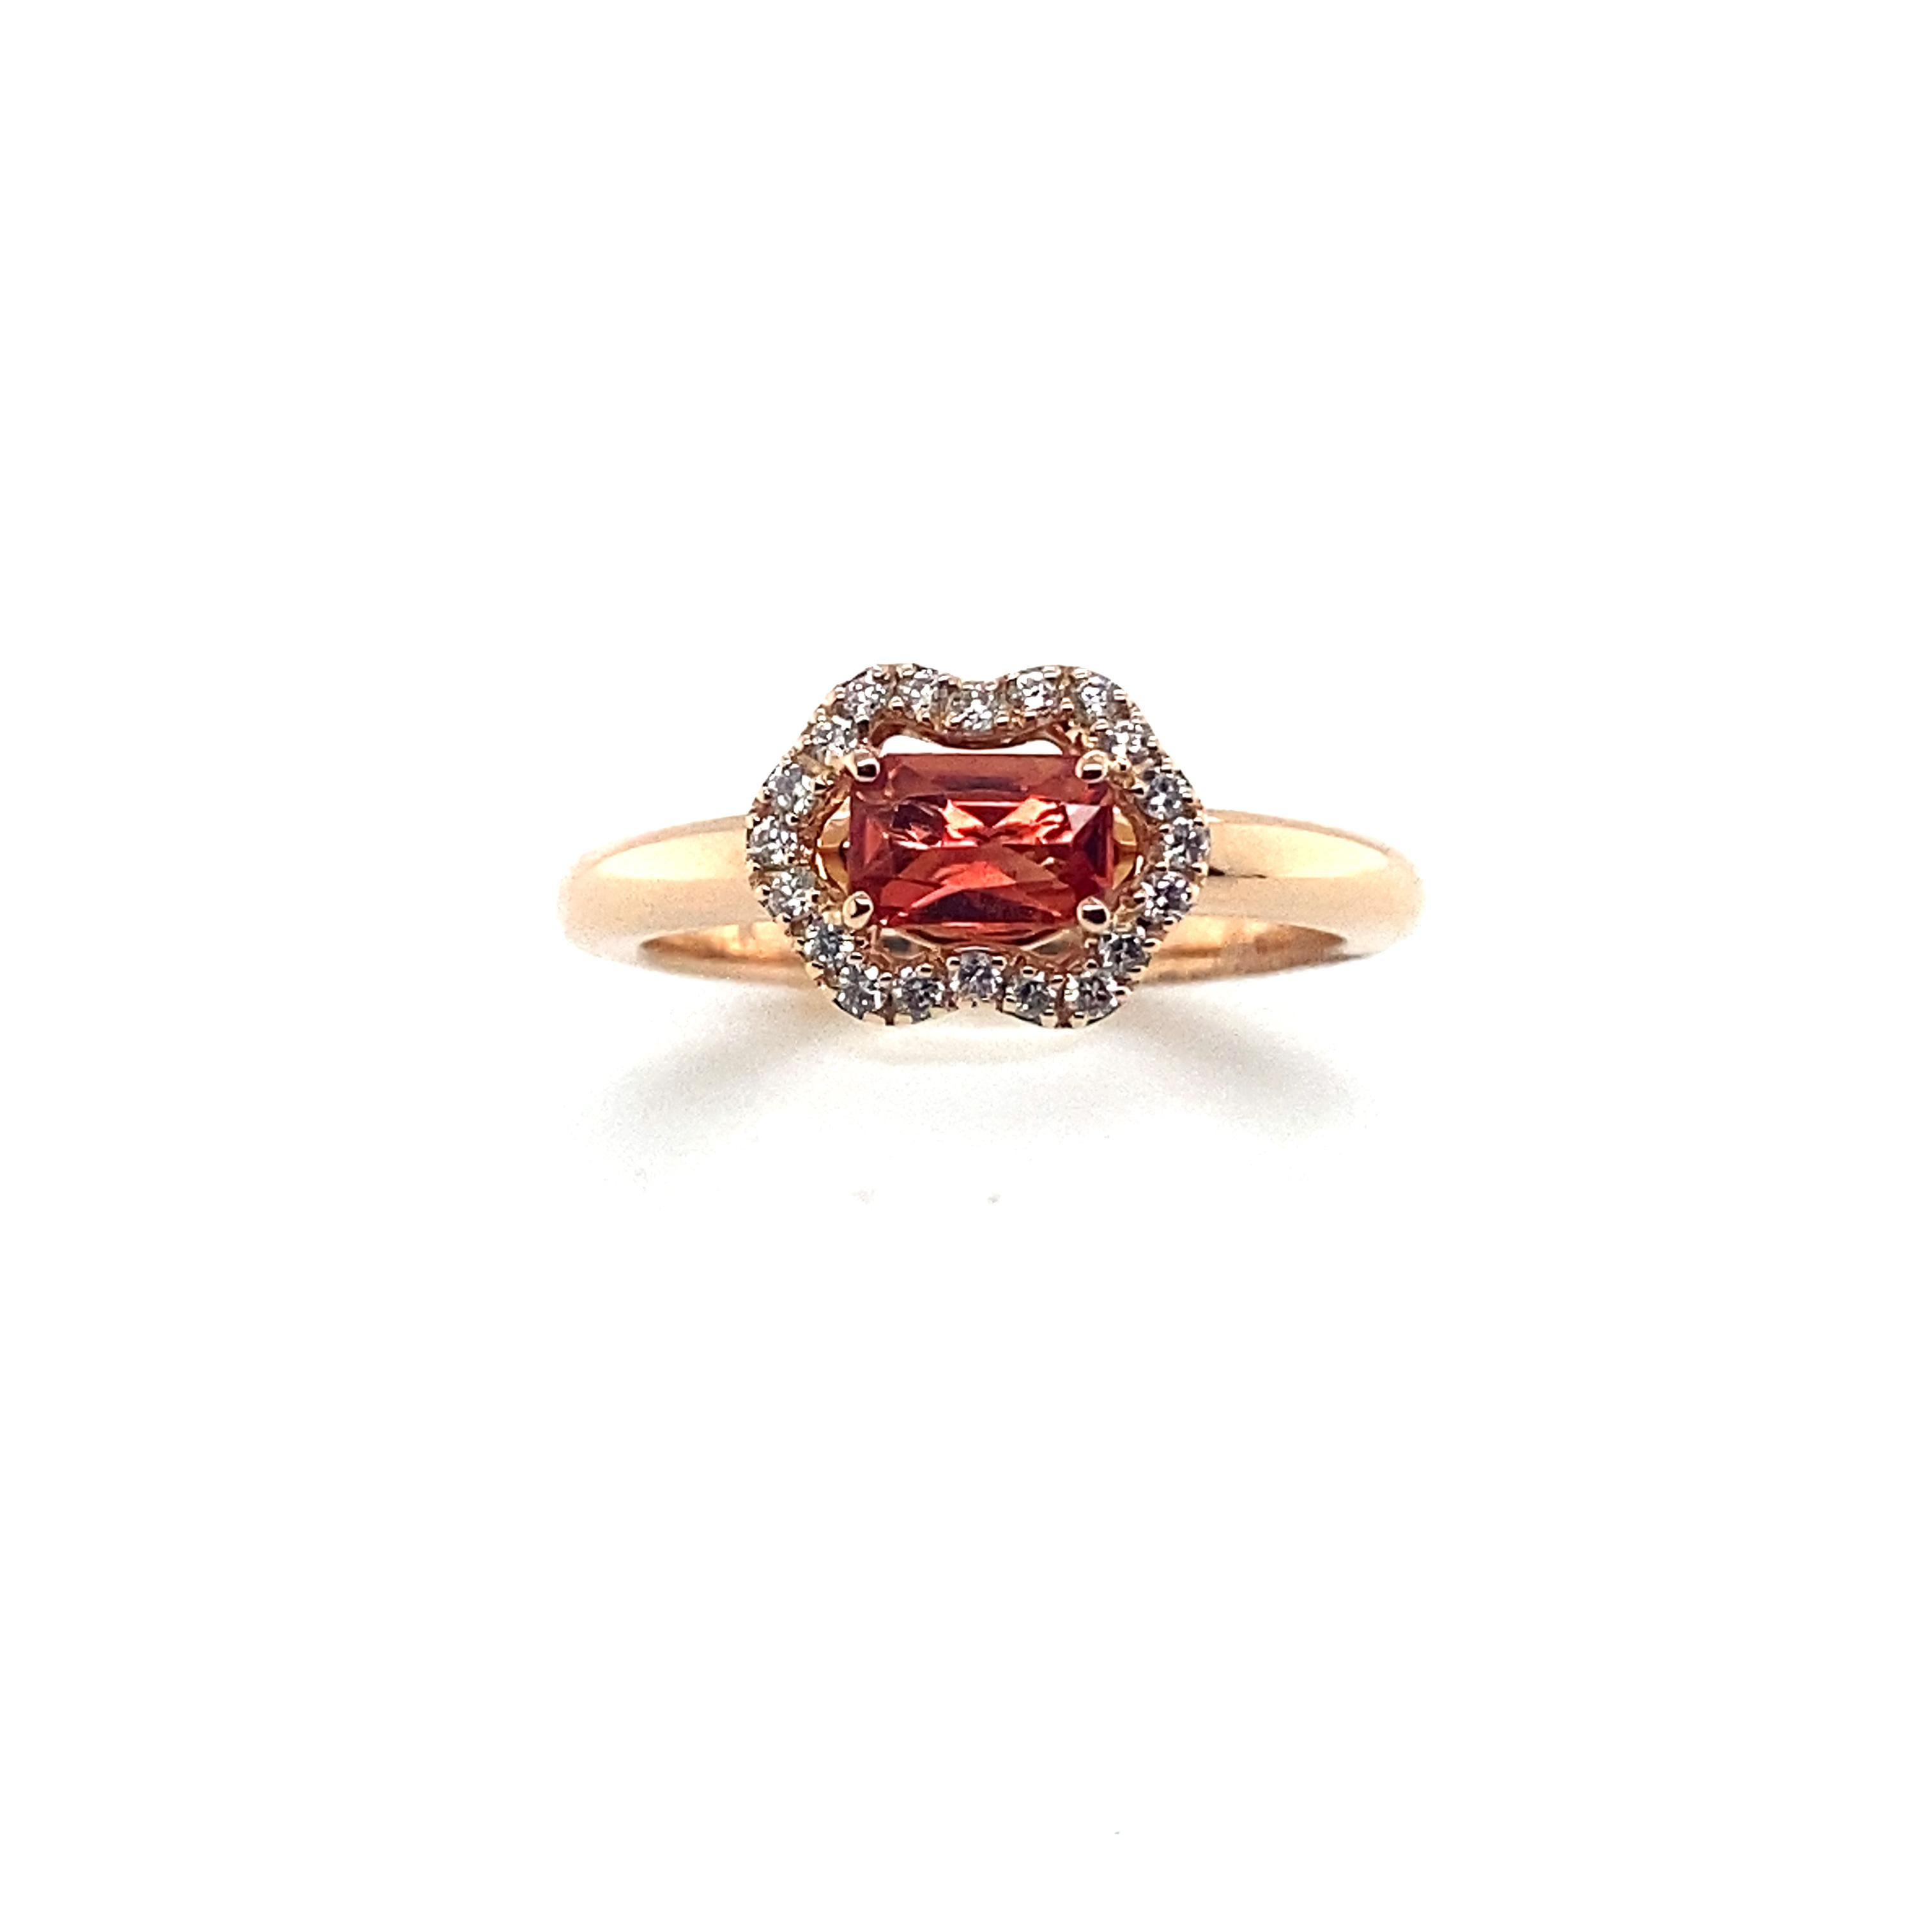 Pink Gold Ring with a Beautiful Orange Sapphire Surrounded by Diamonds.
Pink gold ring accompanied by a coussin orange sapphire which weight 0.53 carats, color orange.
It is surrounded by 20 diamonds which weigh 0.13 carats, color F.

Weight: 4.62